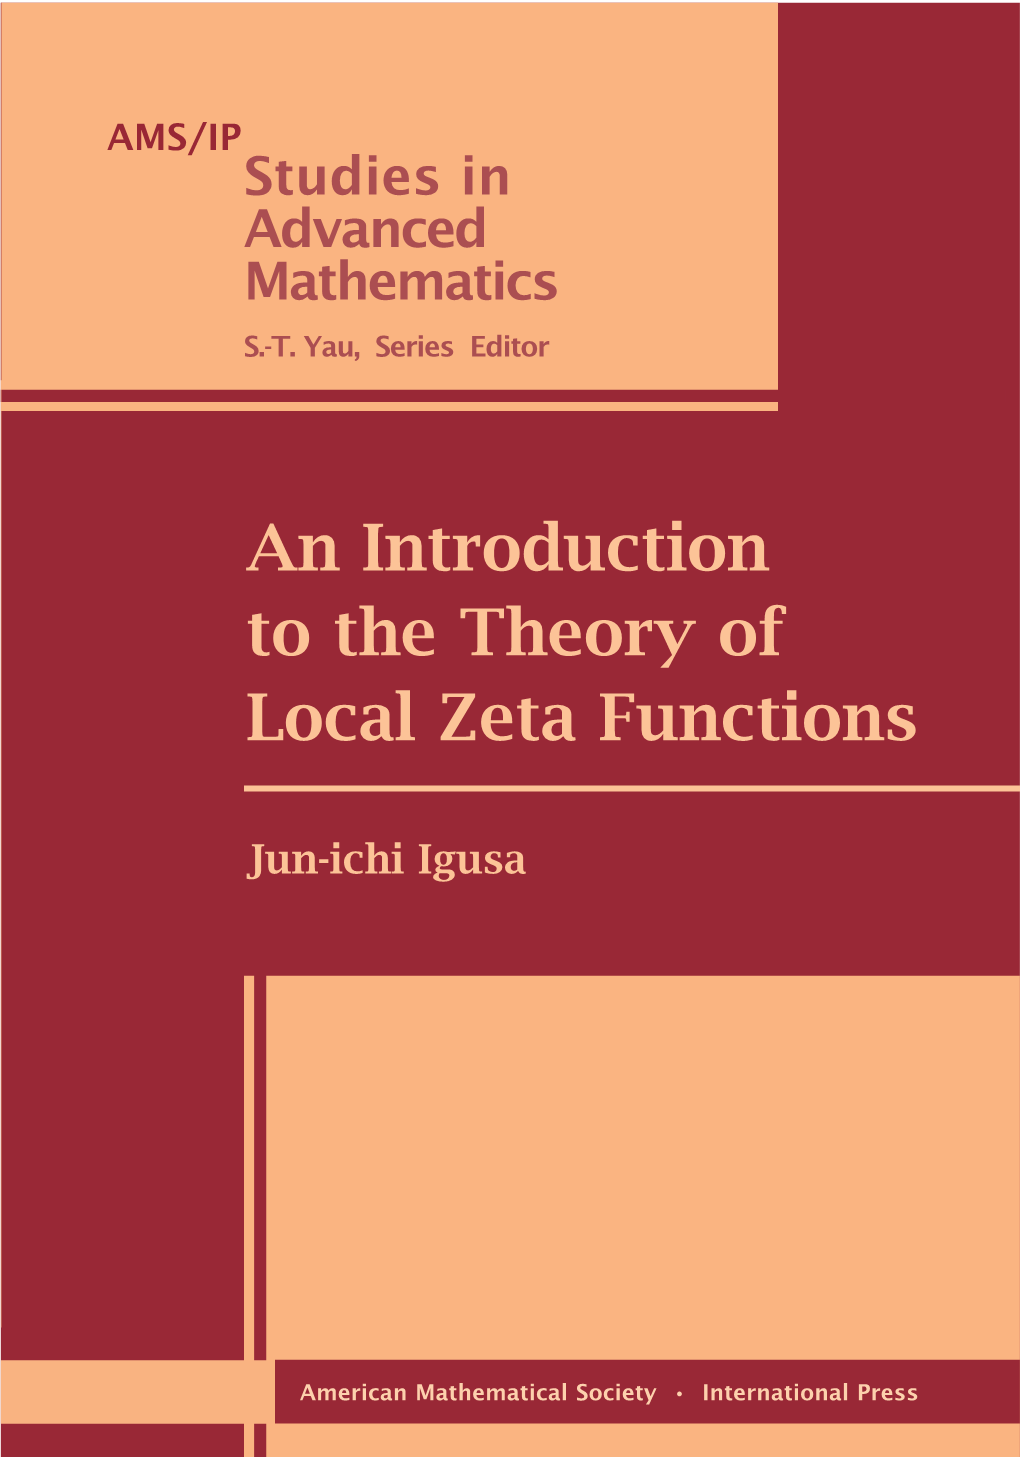 An Introduction to the Theory of Local Zeta Functions